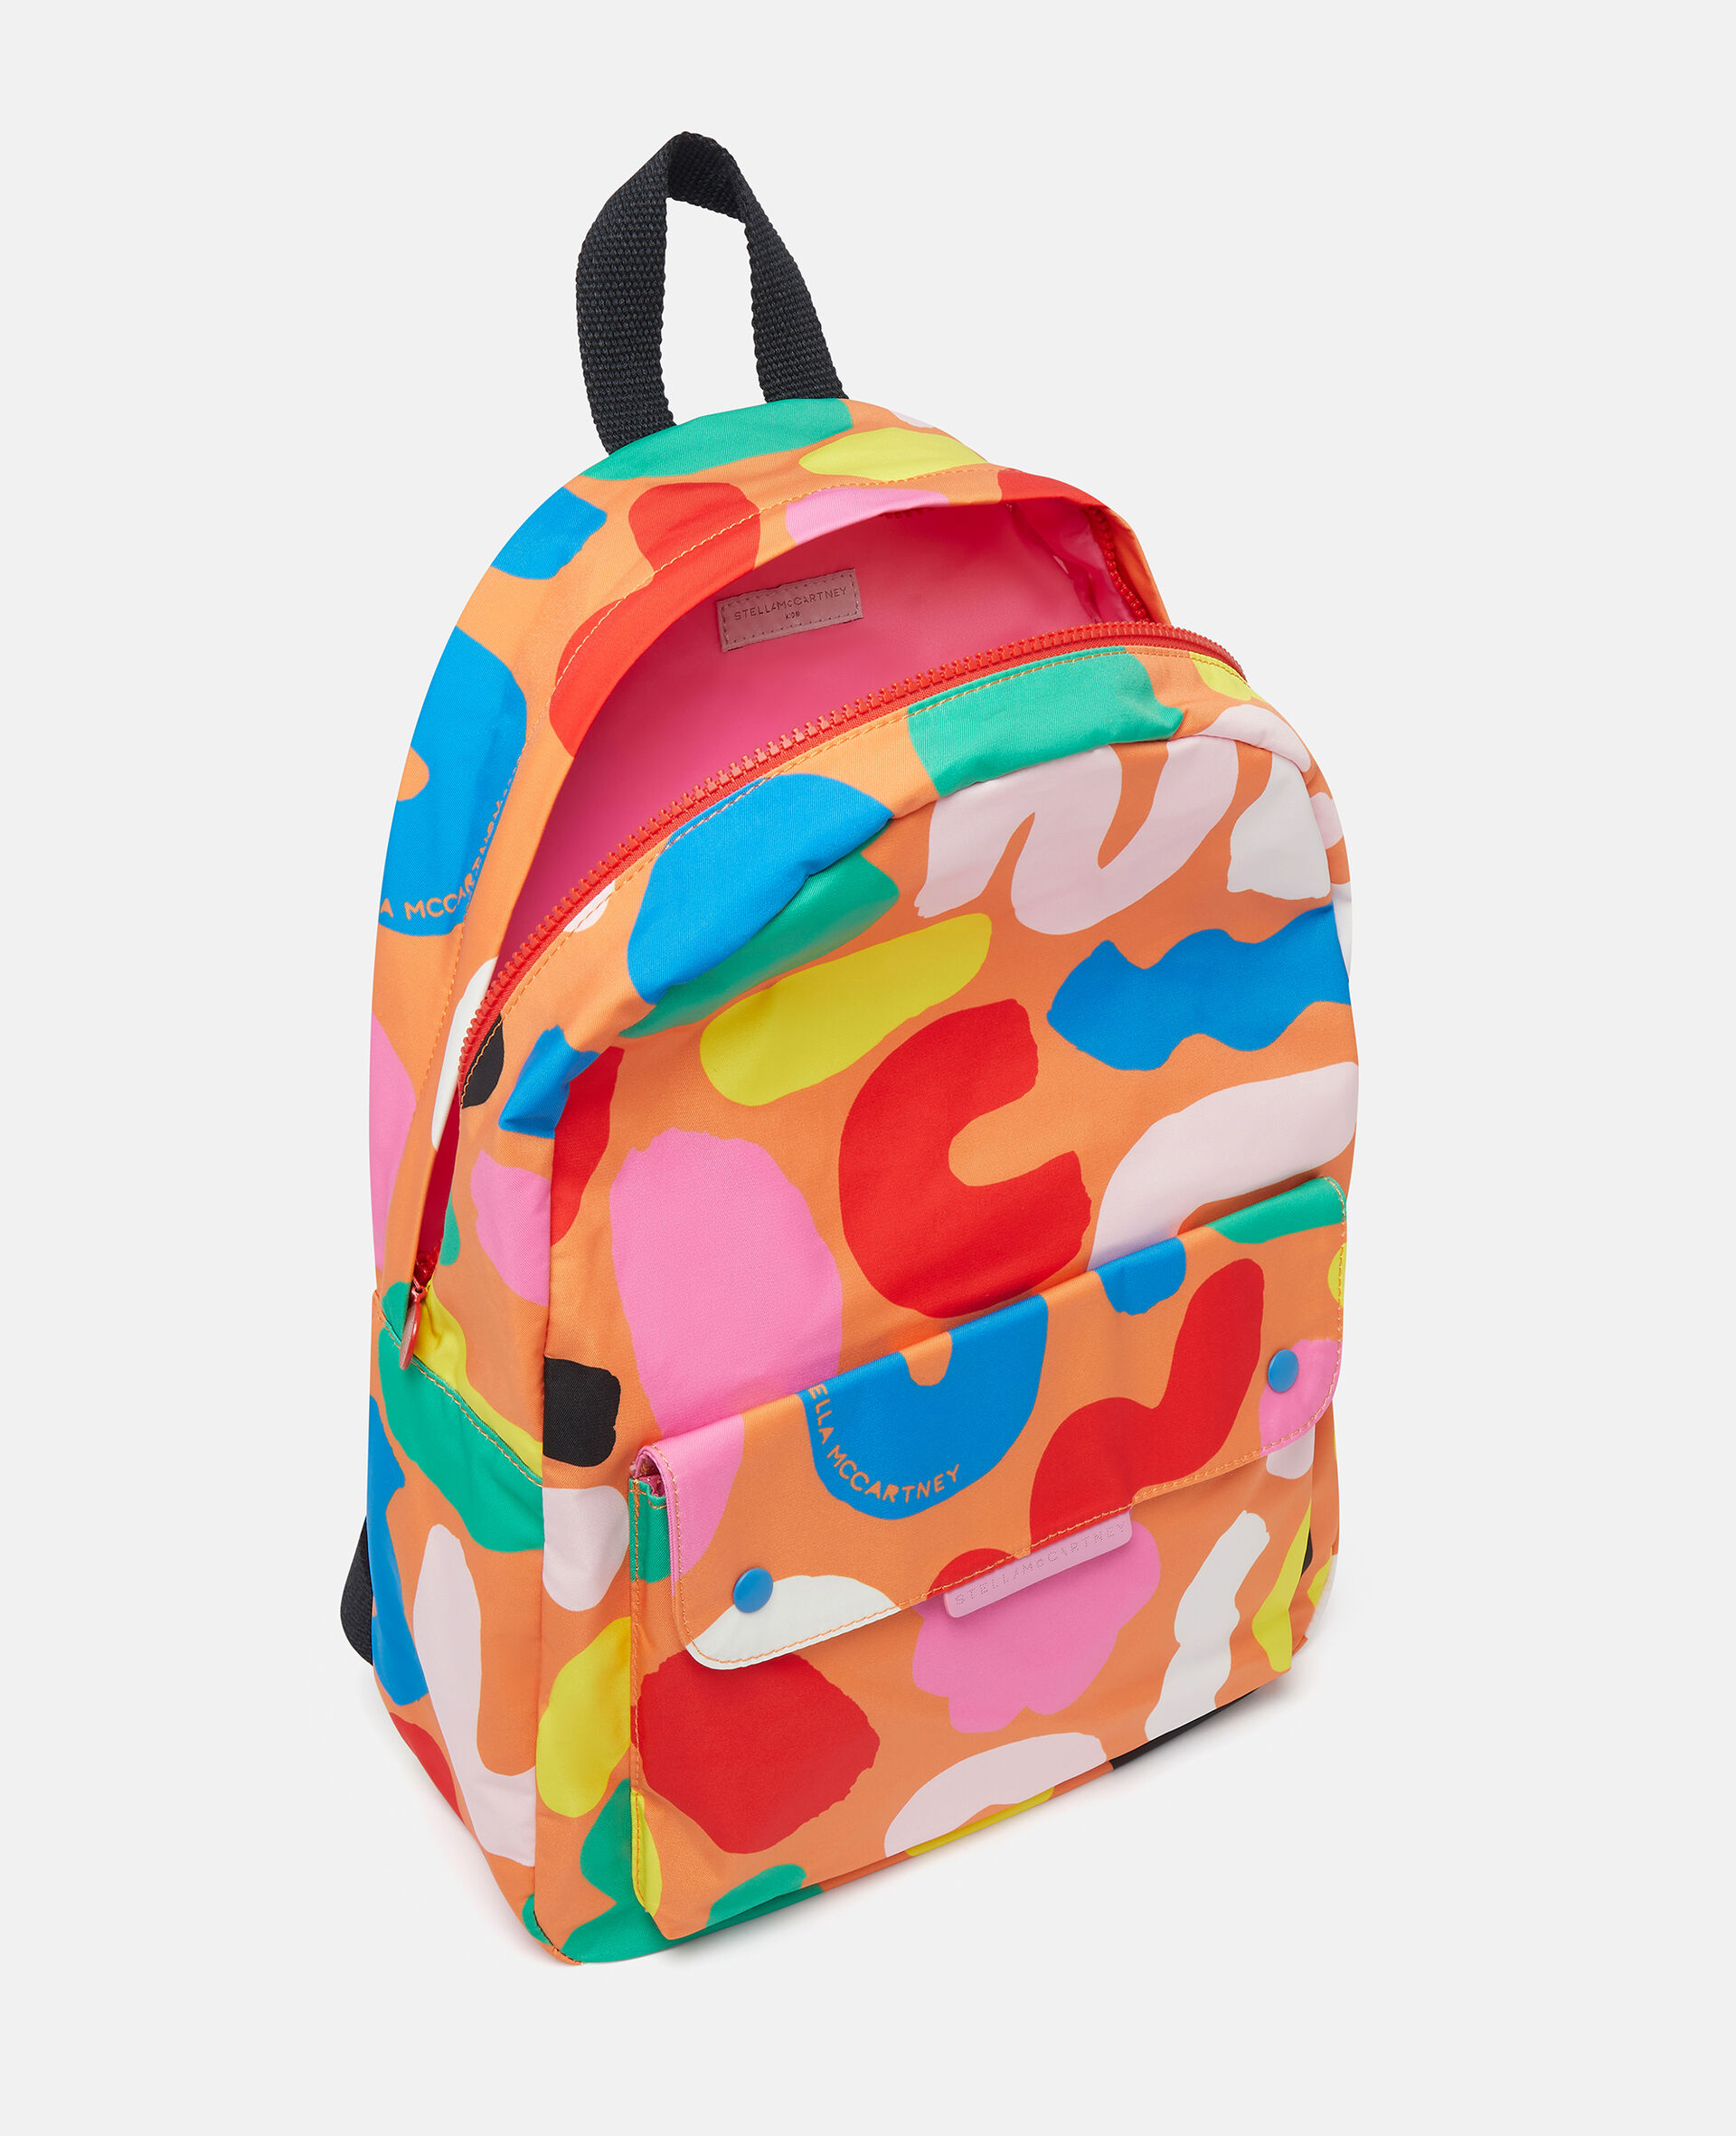 Abstract Shapes Backpack-Pink-large image number 2